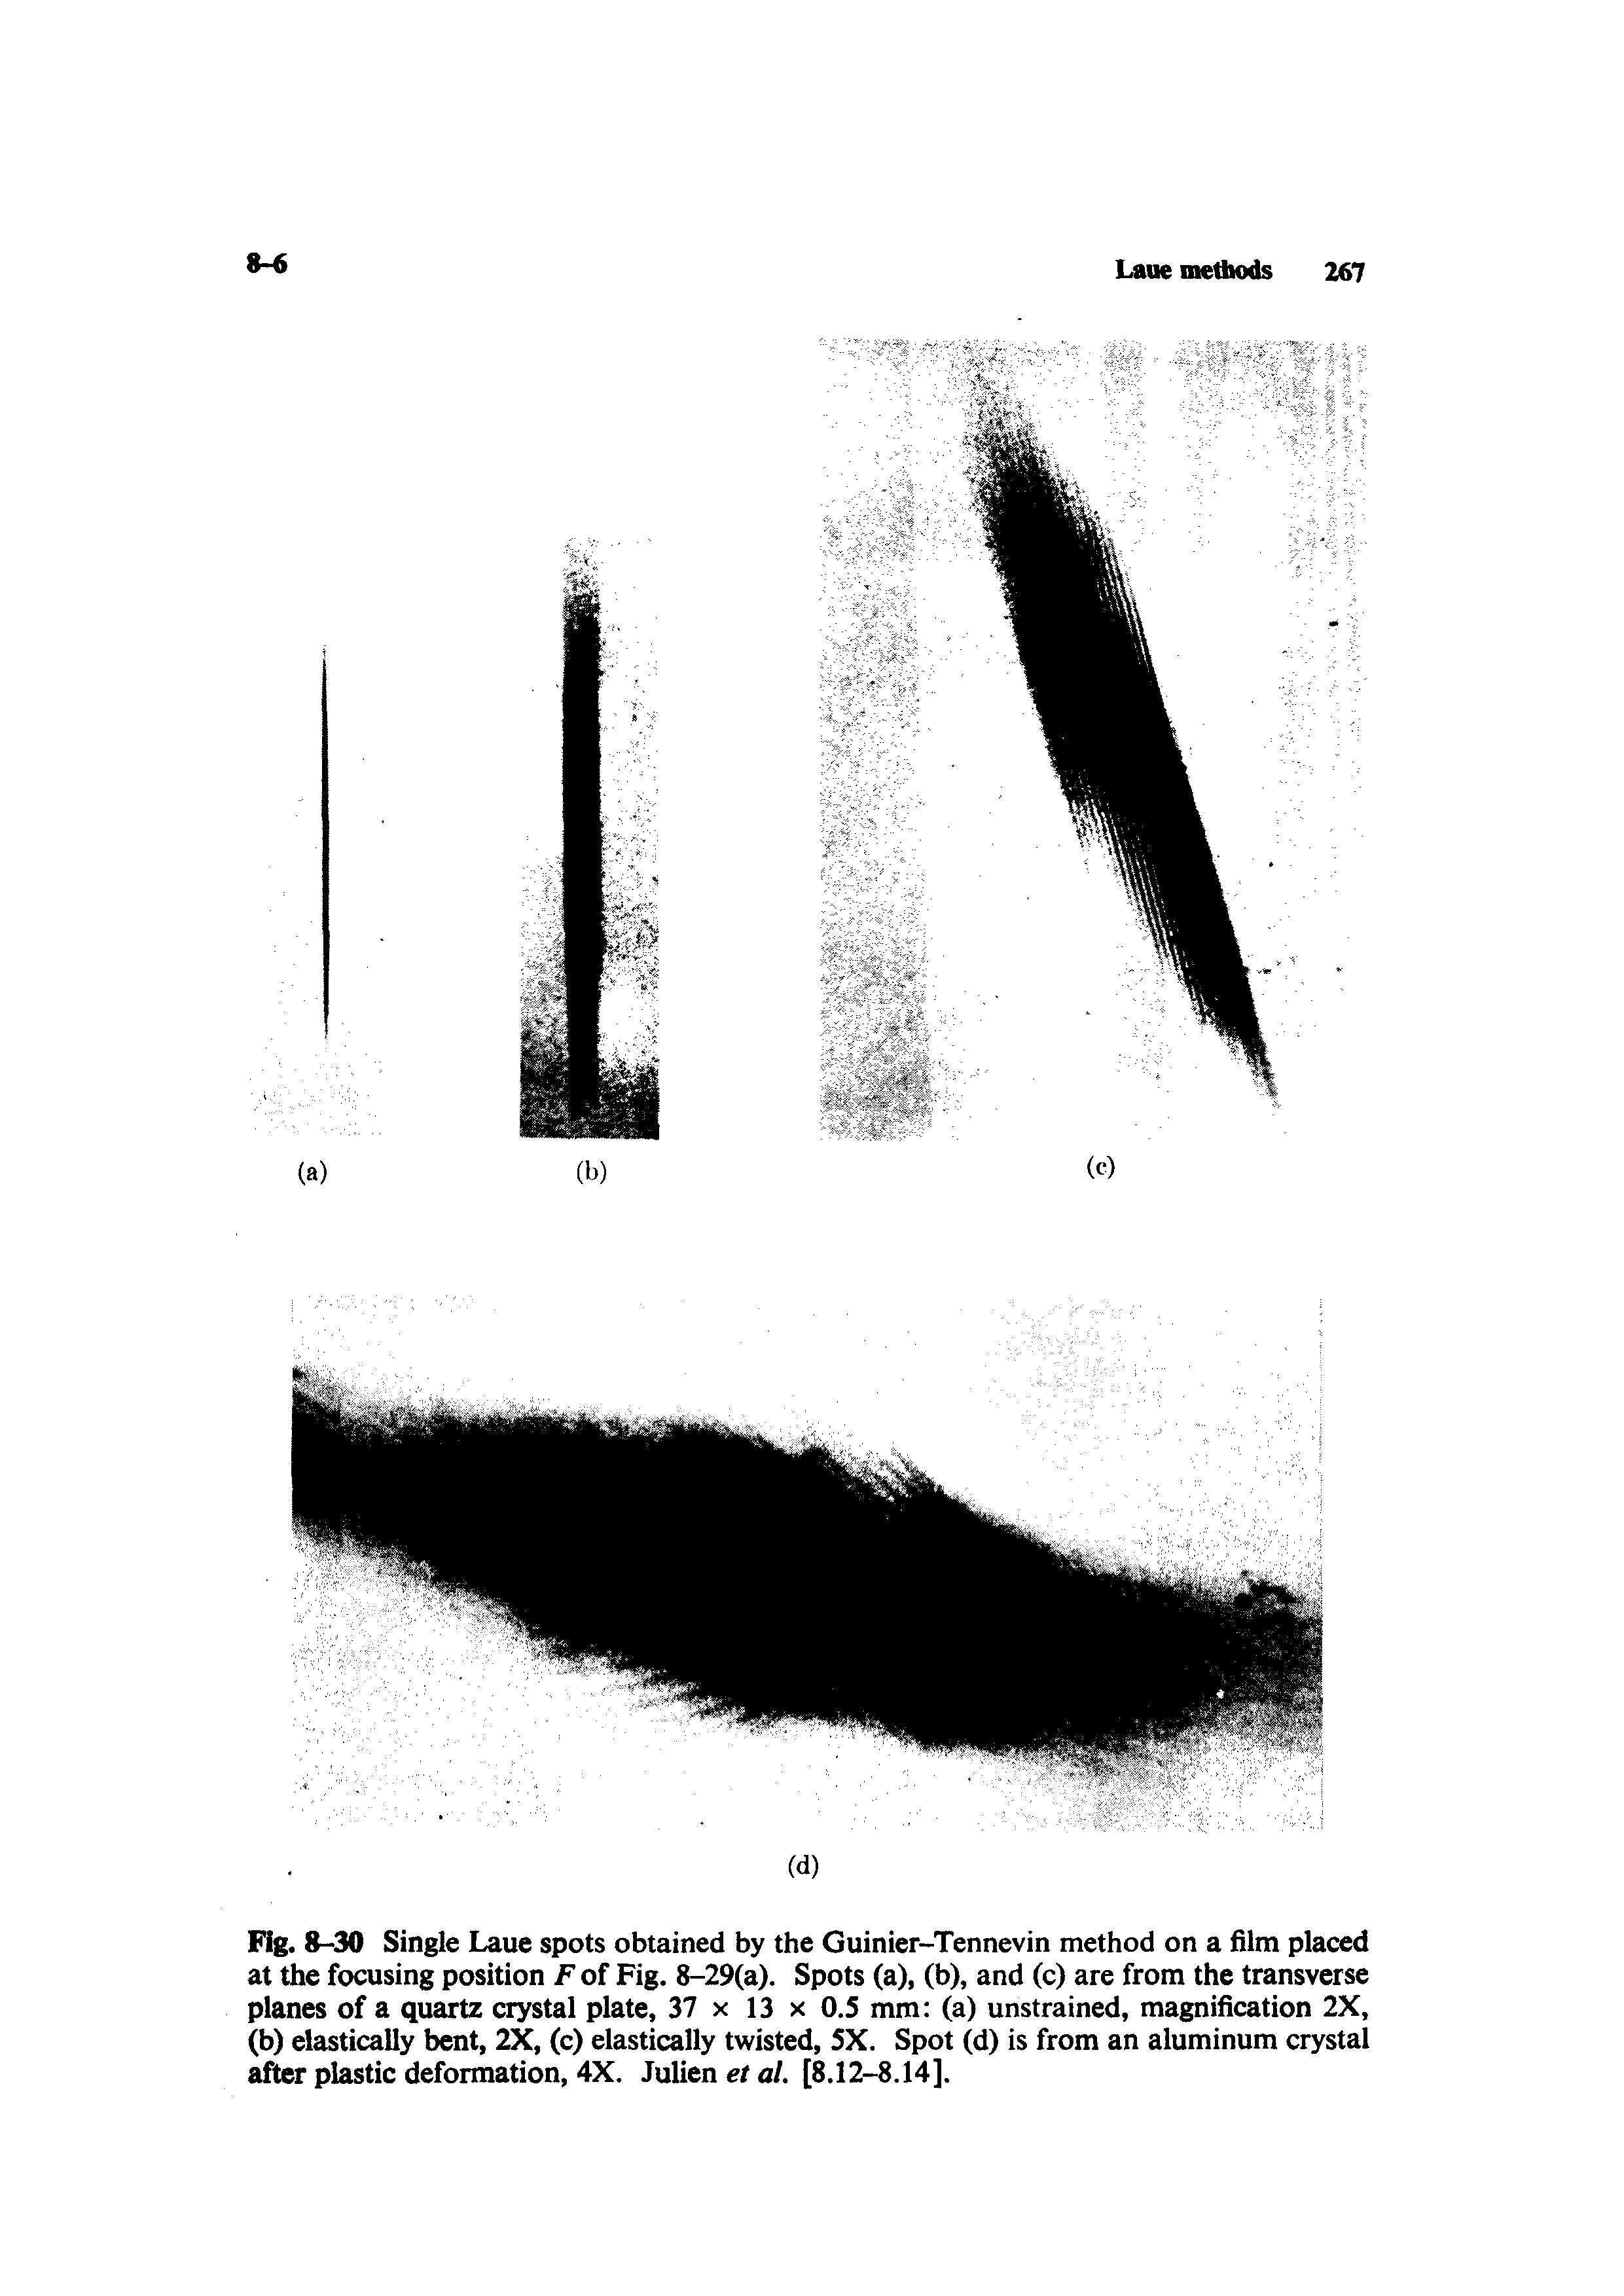 Fig. 8-30 Single Laue spots obtained by the Guinier-Tennevin method on a film placed at the focusing position Fof Fig. 8-29(a). Spots (a), (b), and (c) are from the transverse planes of a quartz crystal plate, 37 x 13 x 0.5 mm (a) unstrained, magnification 2X, (b) elastically bent, 2X, (c) elastically twisted, 5X. Spot (d) is from an aluminum crystal after plastic deformation, 4X. Julien et al. [8.12-8.14].